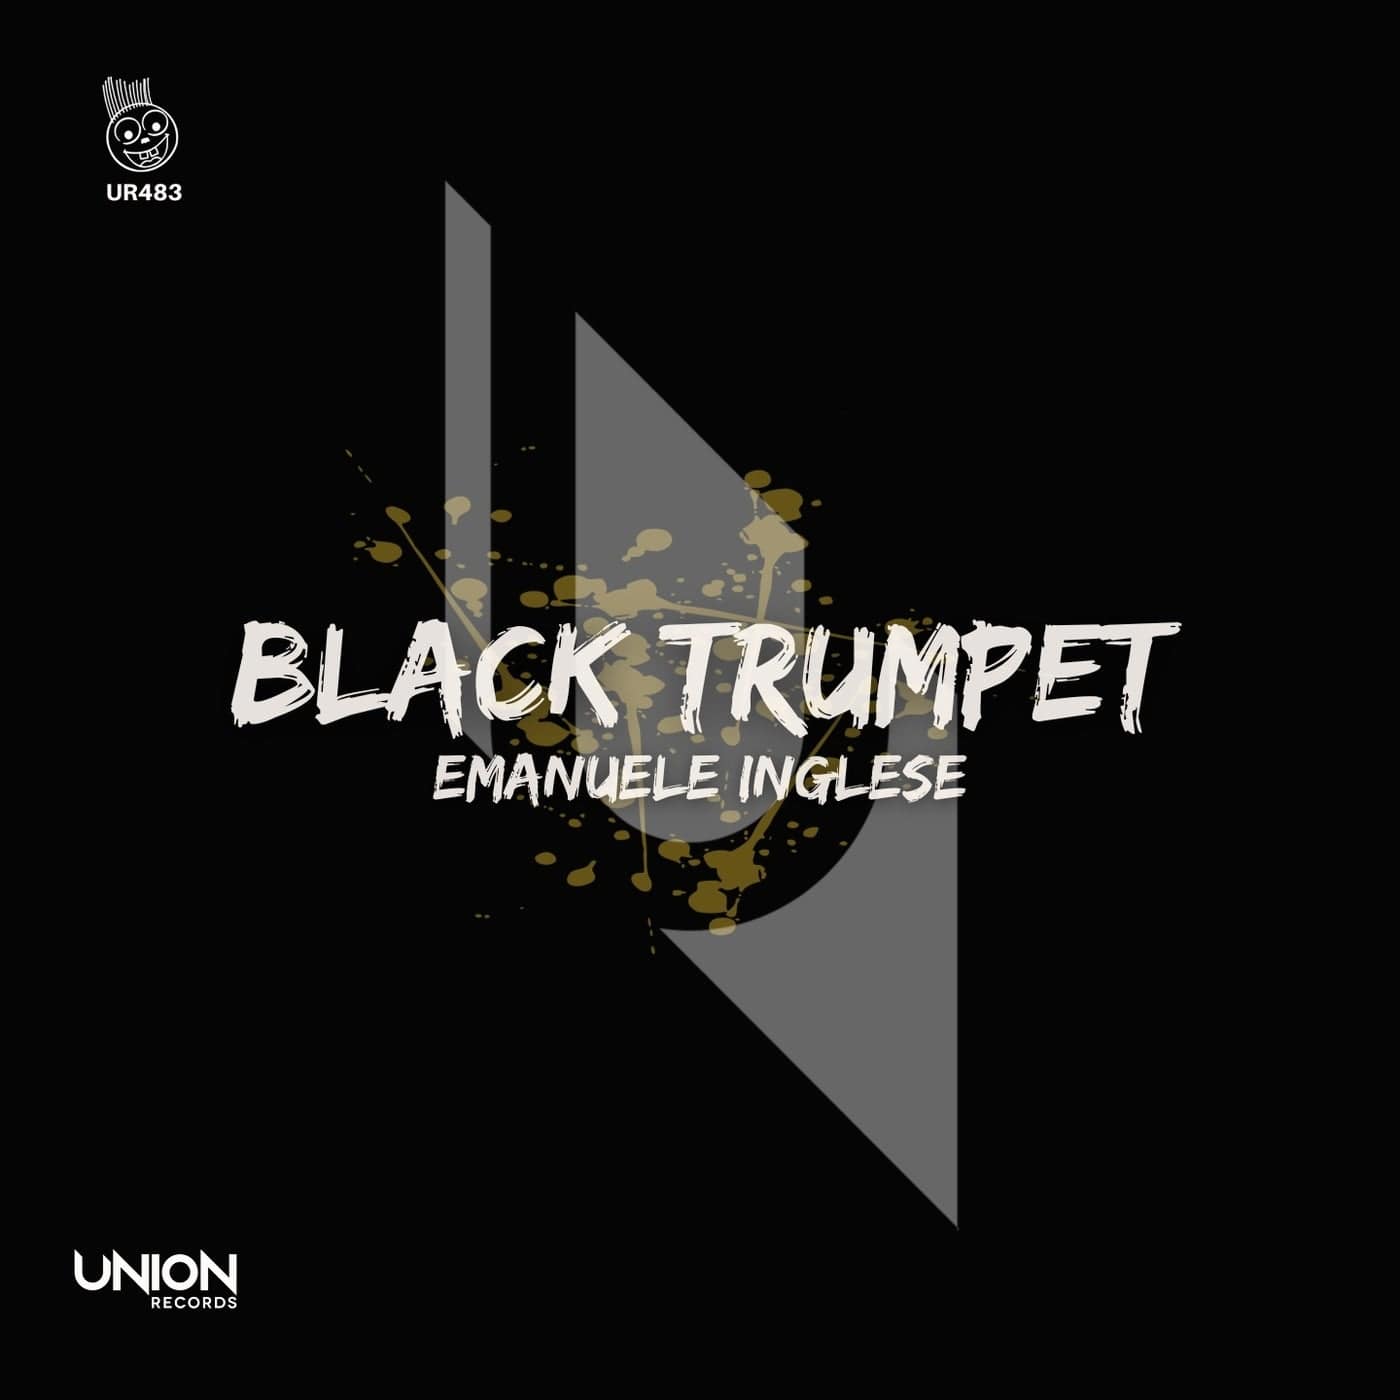 image cover: Emanuele Inglese - Black Trumpet on UNION RECORDS (IT)